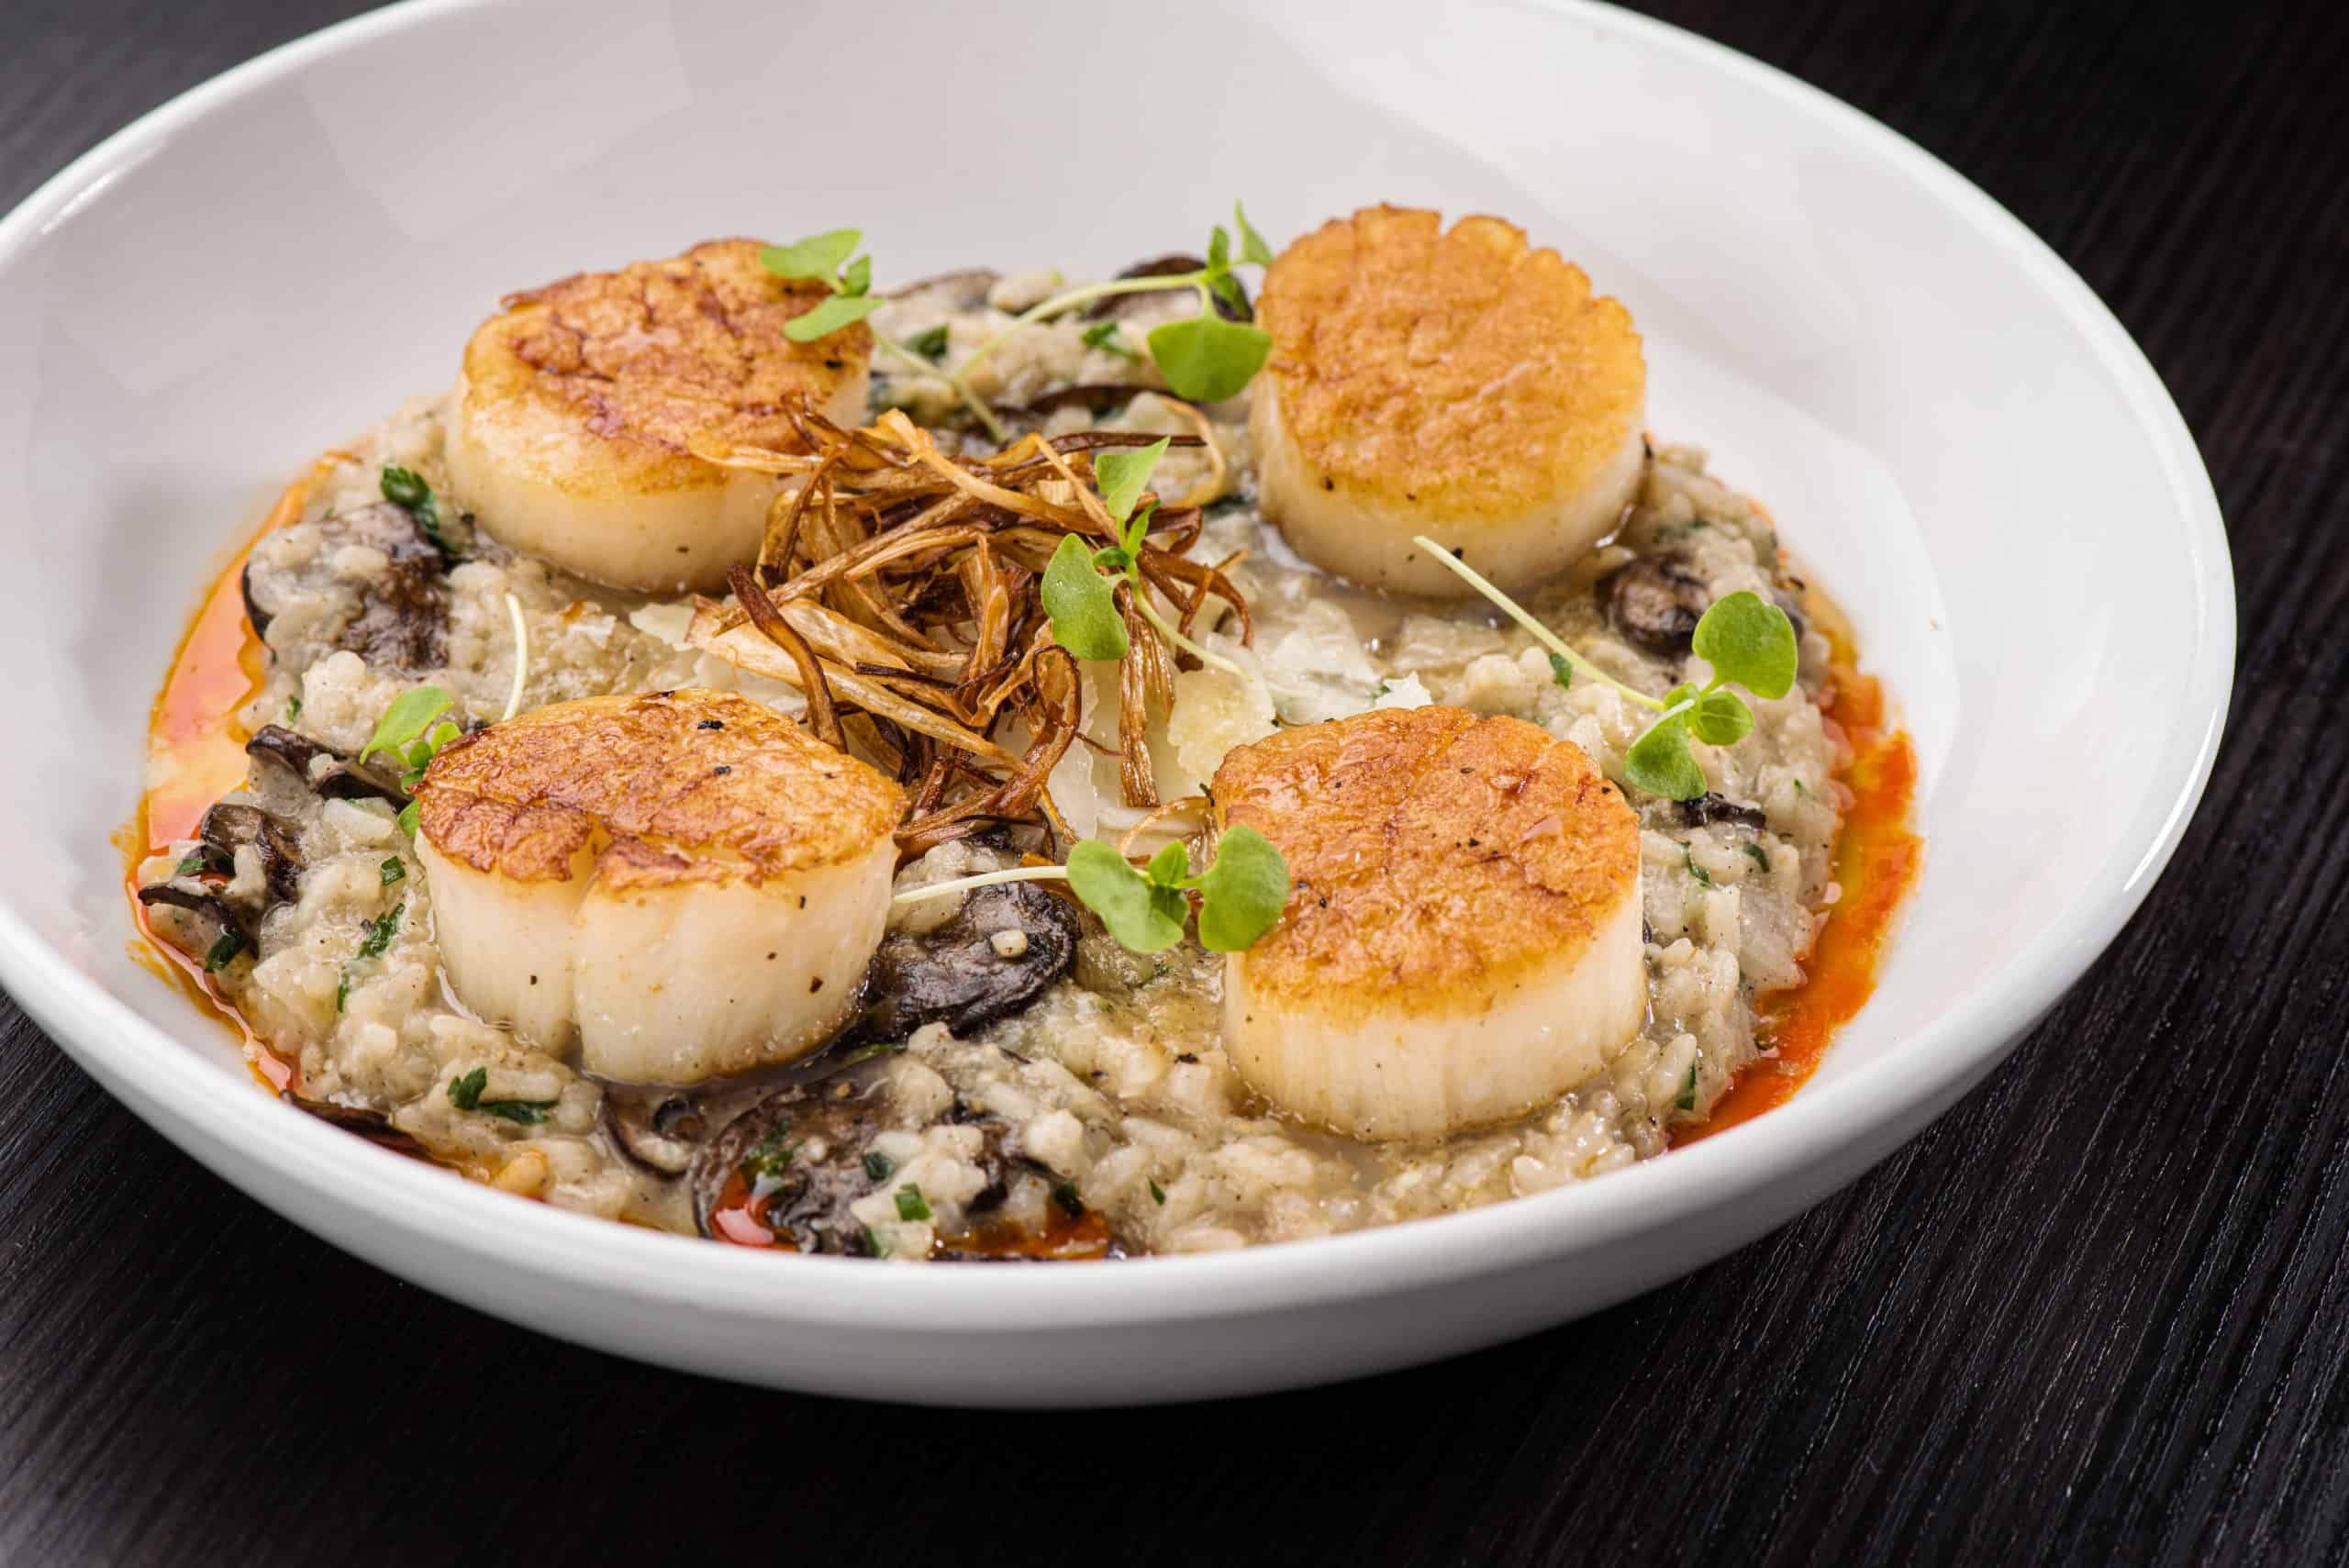 Best things to do in Boca Raton Florida - Jason Hill - Seared Diver Scallops at Oceans234 courtesy of Oceans234